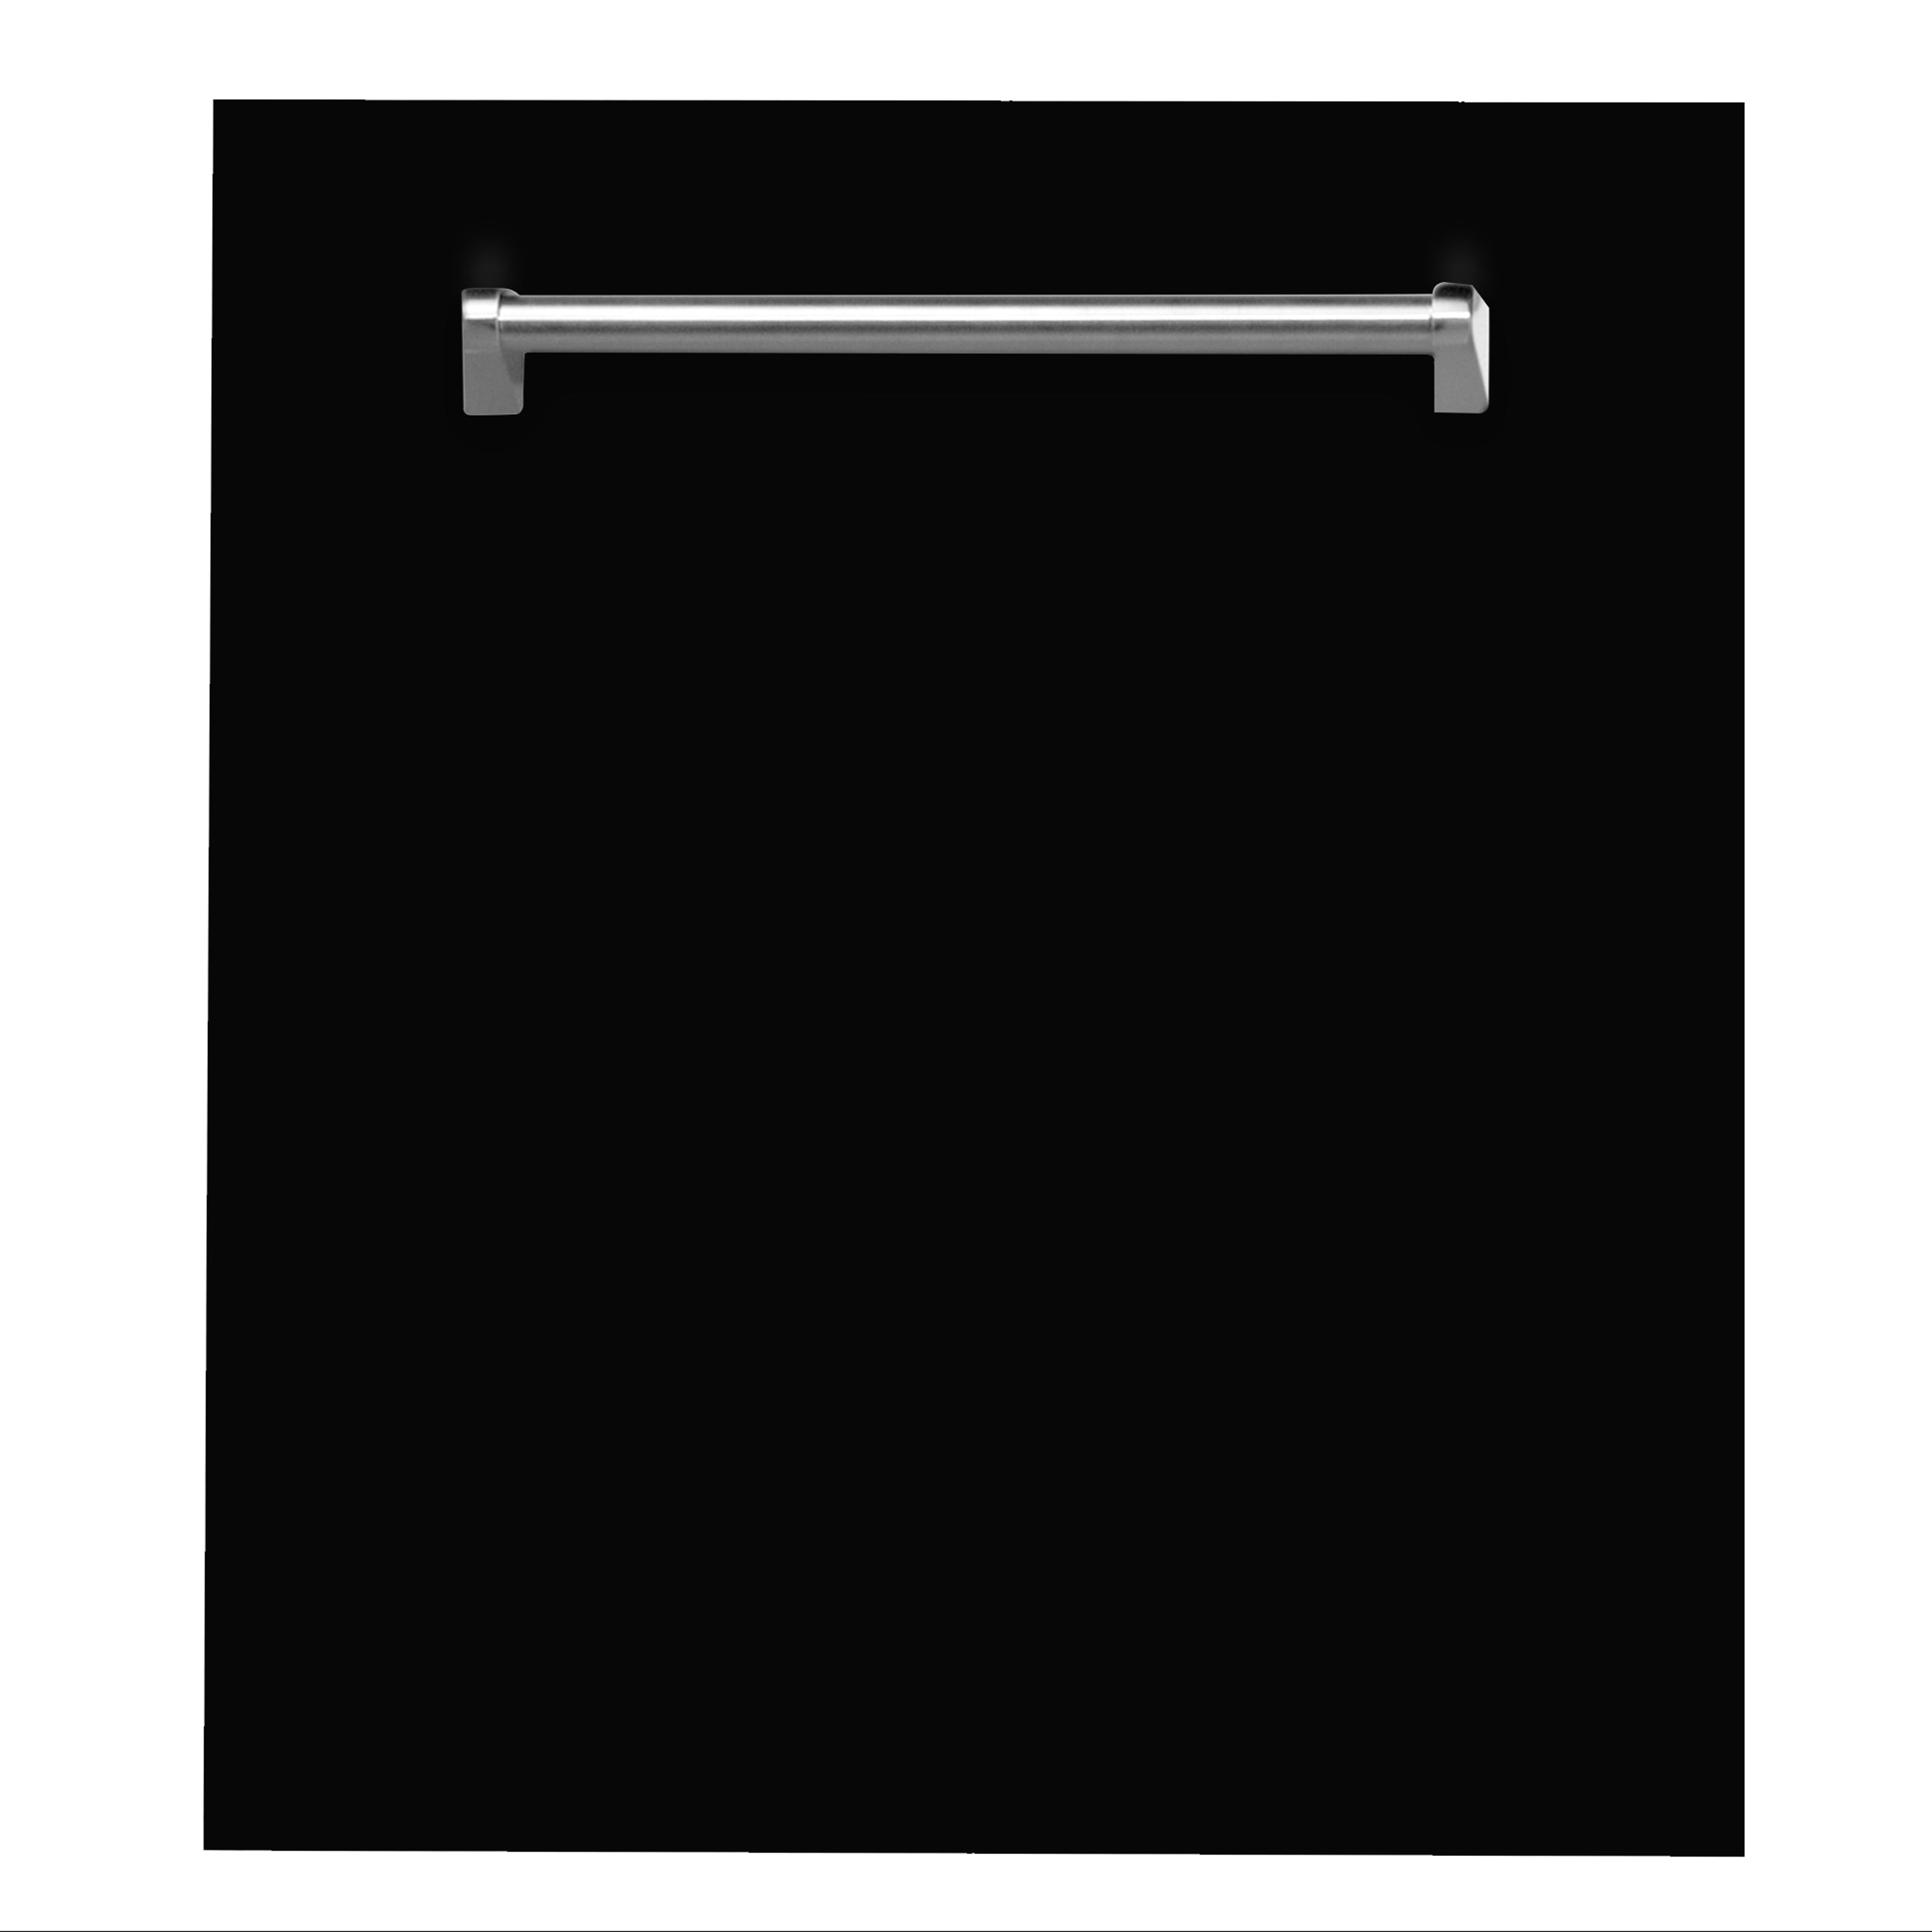 ZLINE 24 in. Black Matte Top Control Built-In Dishwasher with Stainless Steel Tub and Traditional Style Handle, 52dBa (DW-BLM-24)